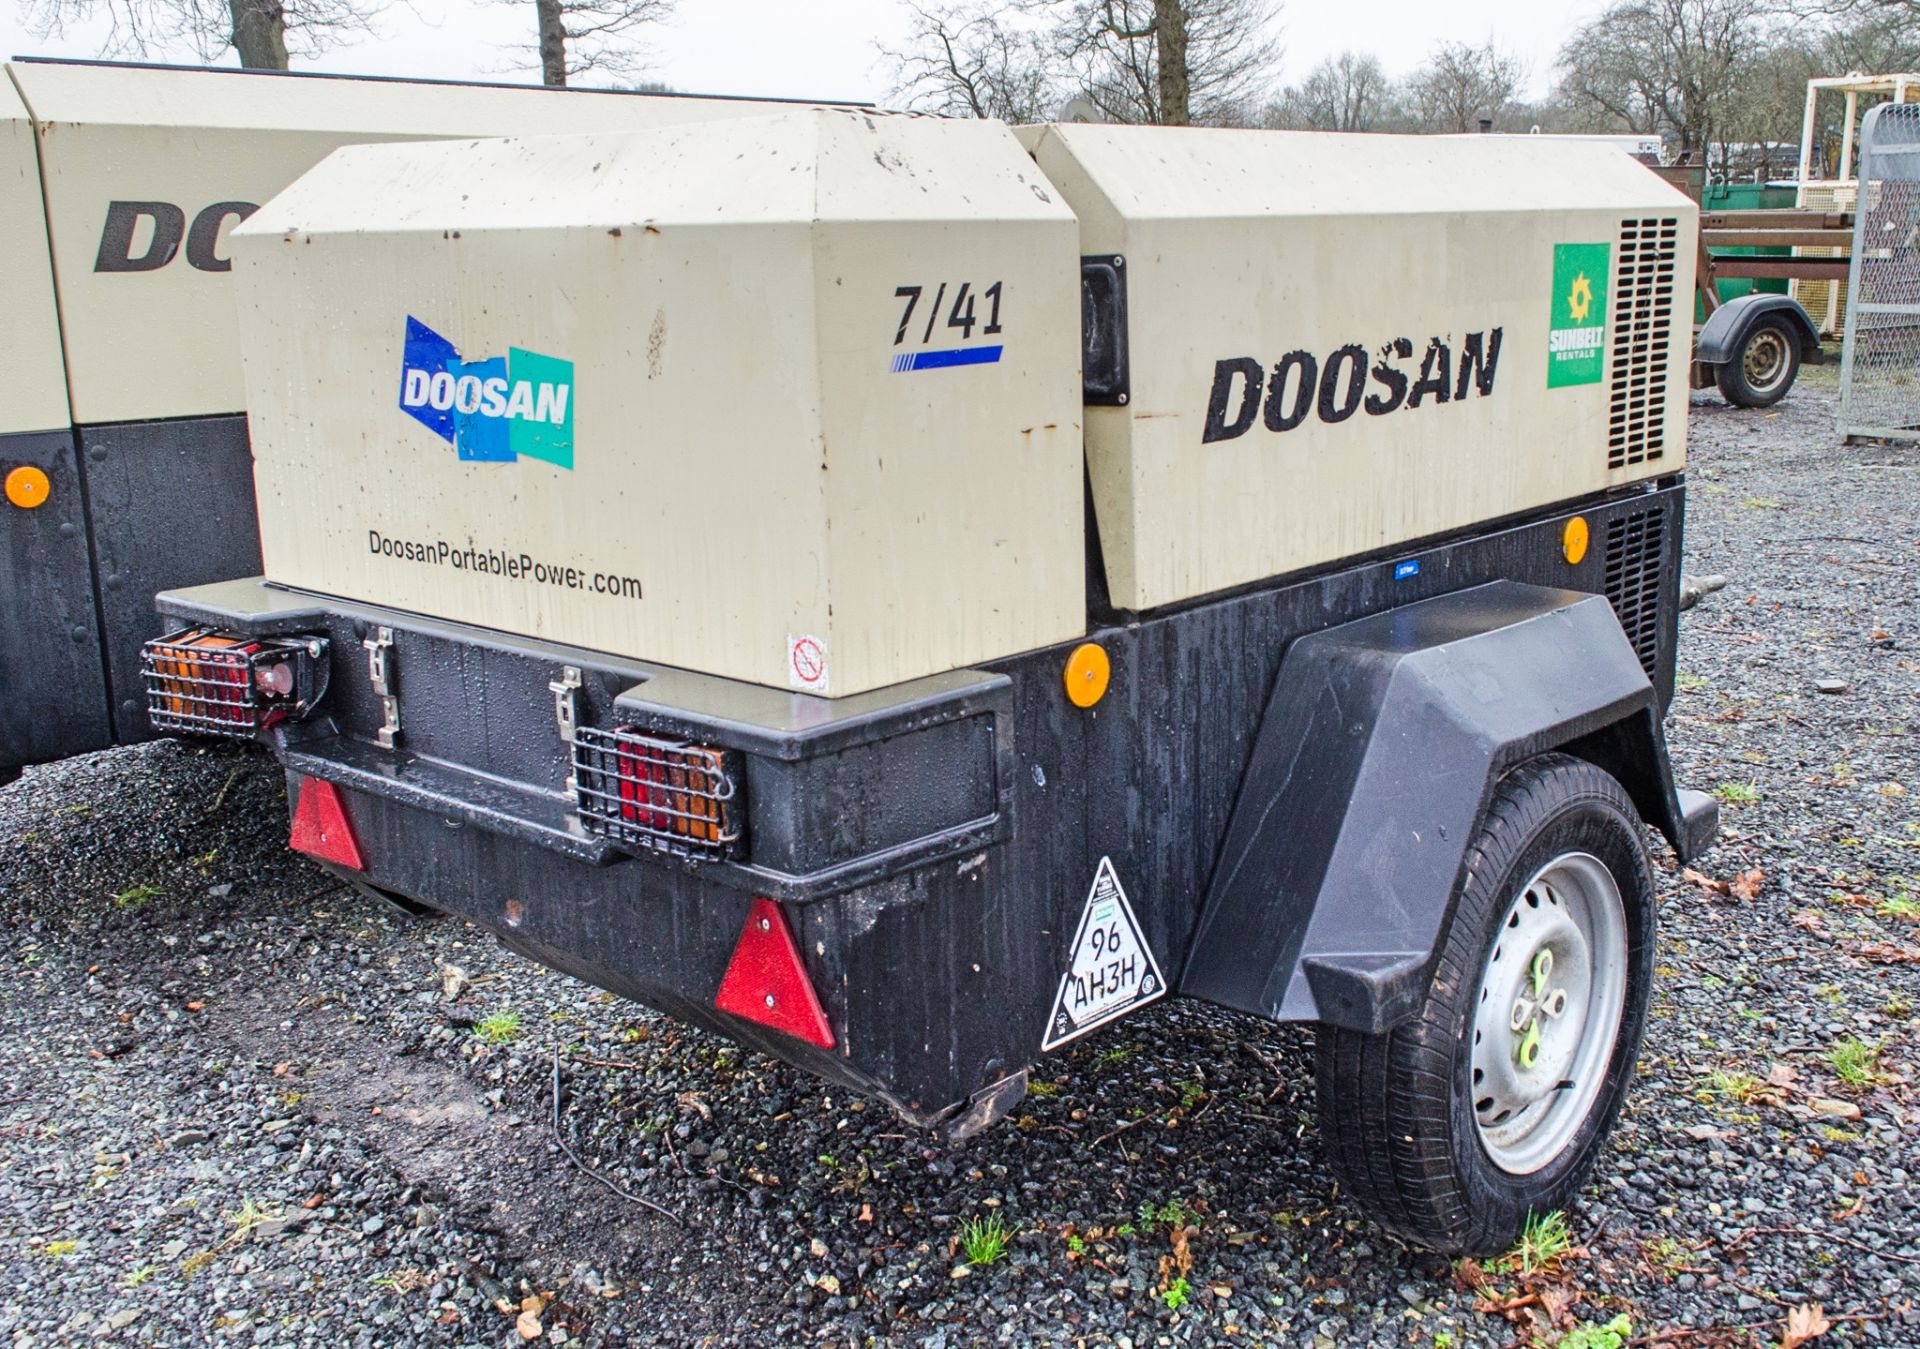 Doosan 7/41 diesel driven fast tow mobile air compressor Year: 2013 S/N: 431992 Recorded hours: 1374 - Image 2 of 7